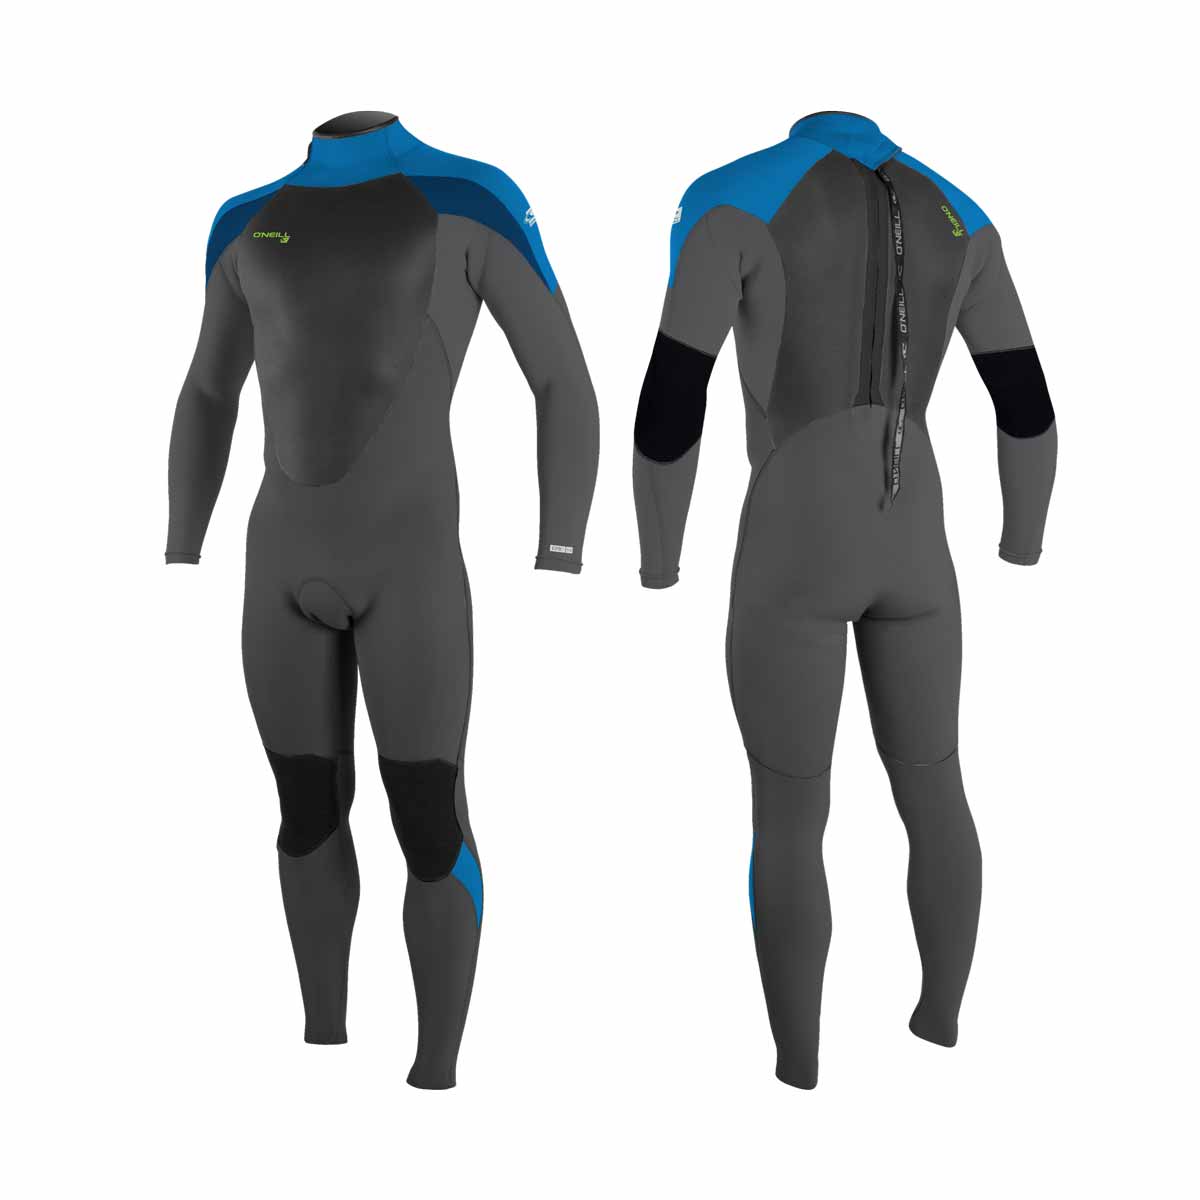 O'Neill Youth Epic full 5/4 mm Wetsuit – Black/Graph/Baliblue/Deepsea HT9